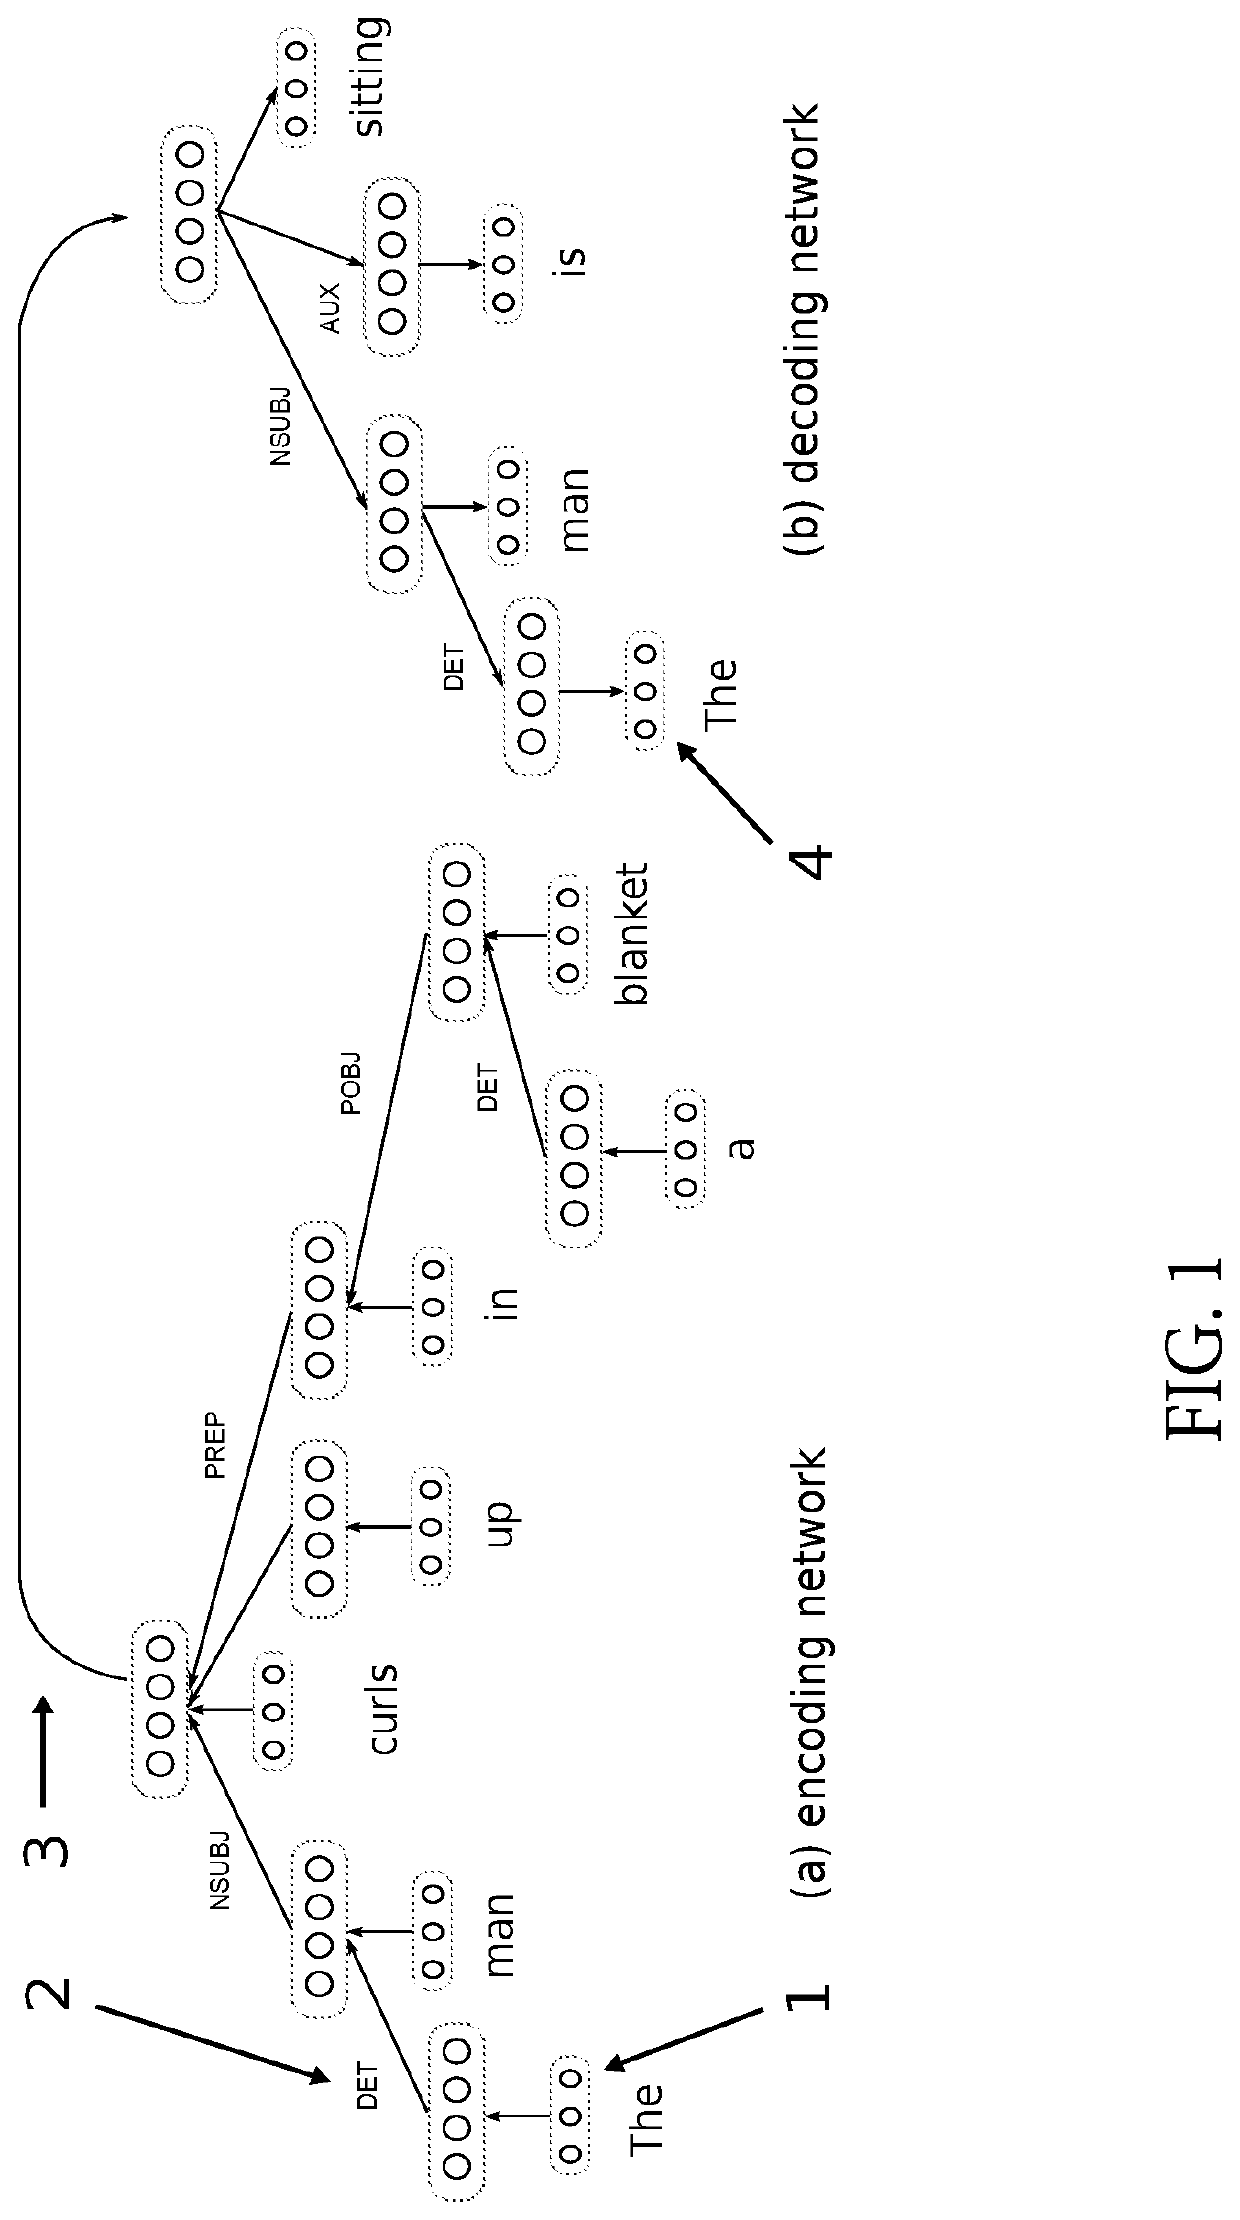 Methods and systems for generating and traversing discourse graphs using artificial neural networks